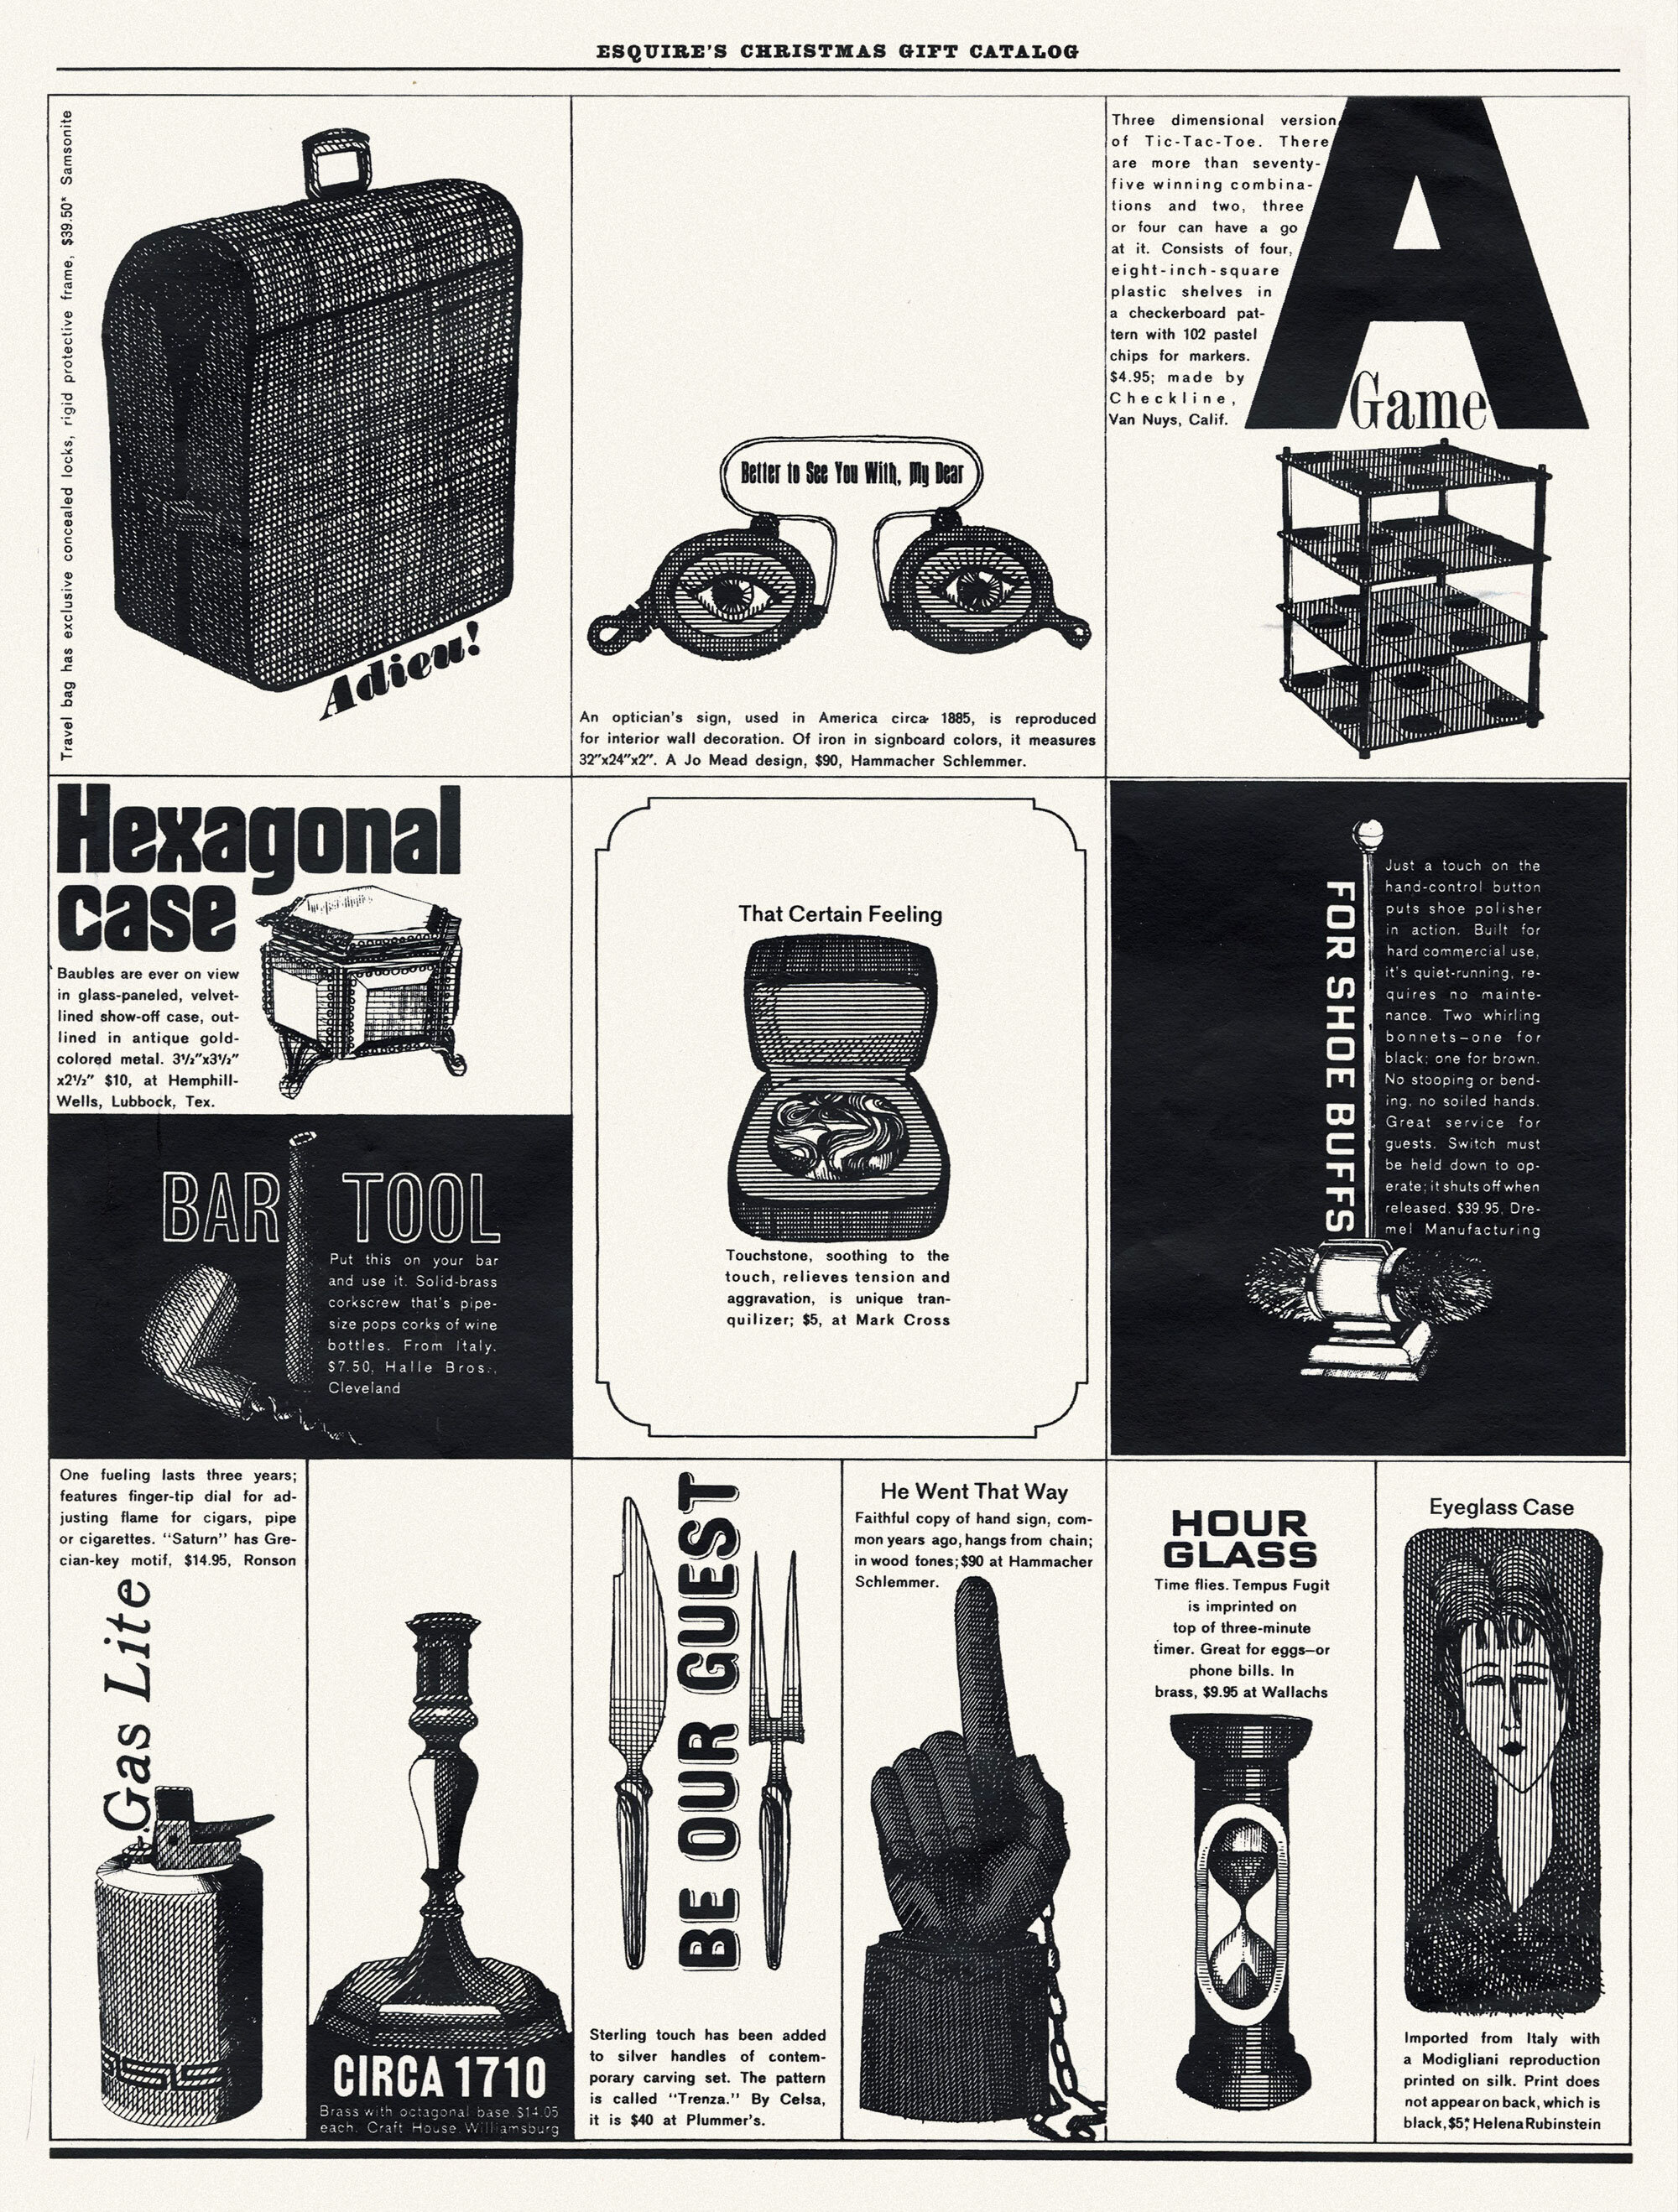 esquire-gift-guide-4.jpg